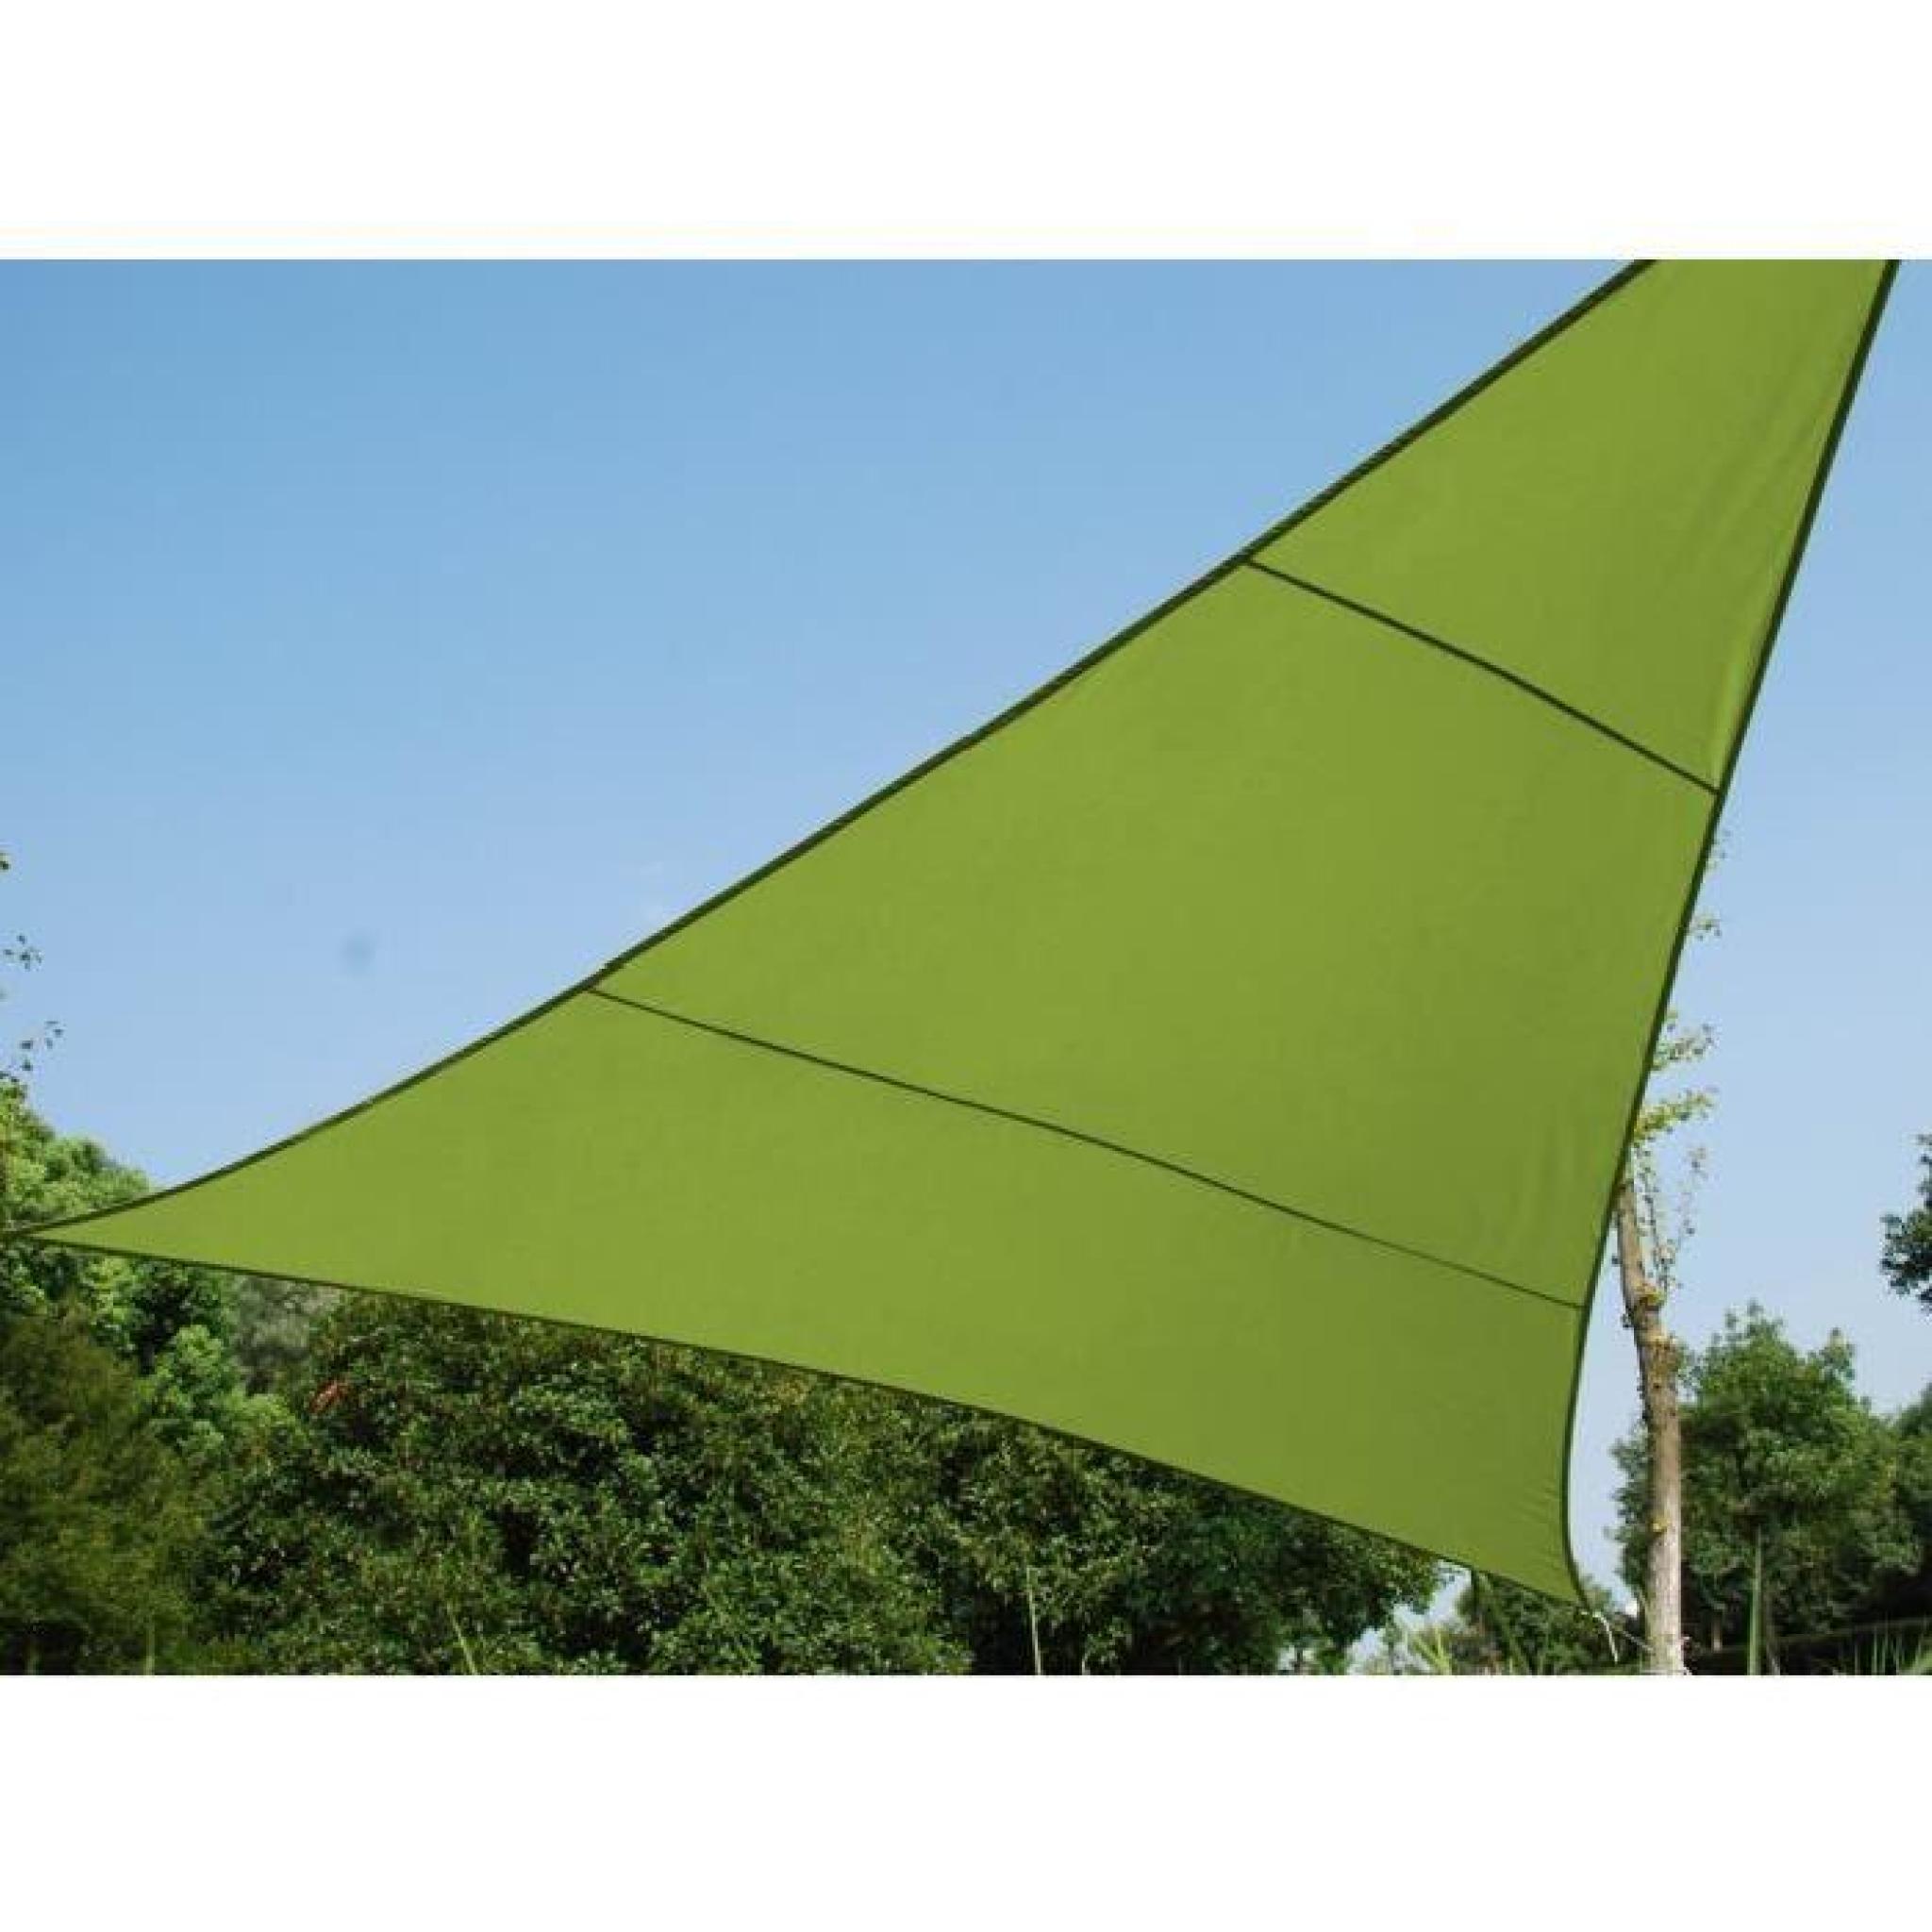 Voile d'ombrage triangulaire 5,00 m CURACAO vert - 180g/m² pas cher